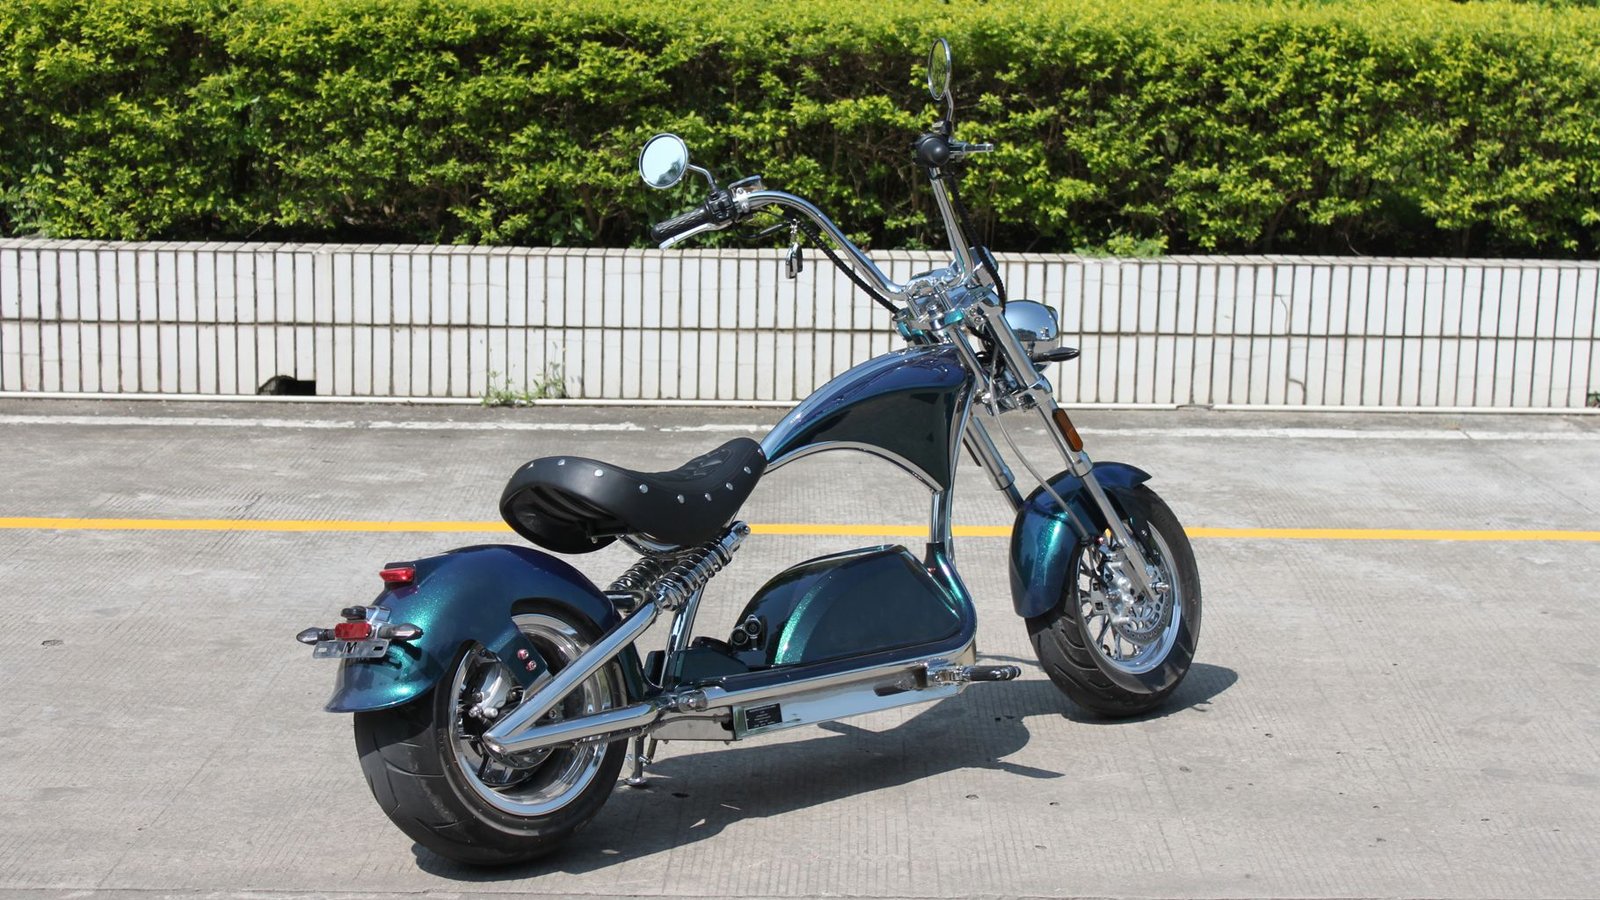 Rooder sara m1ps electric scooter bike citycoco chopper 72v 4000w diamond turquoise green  (6)